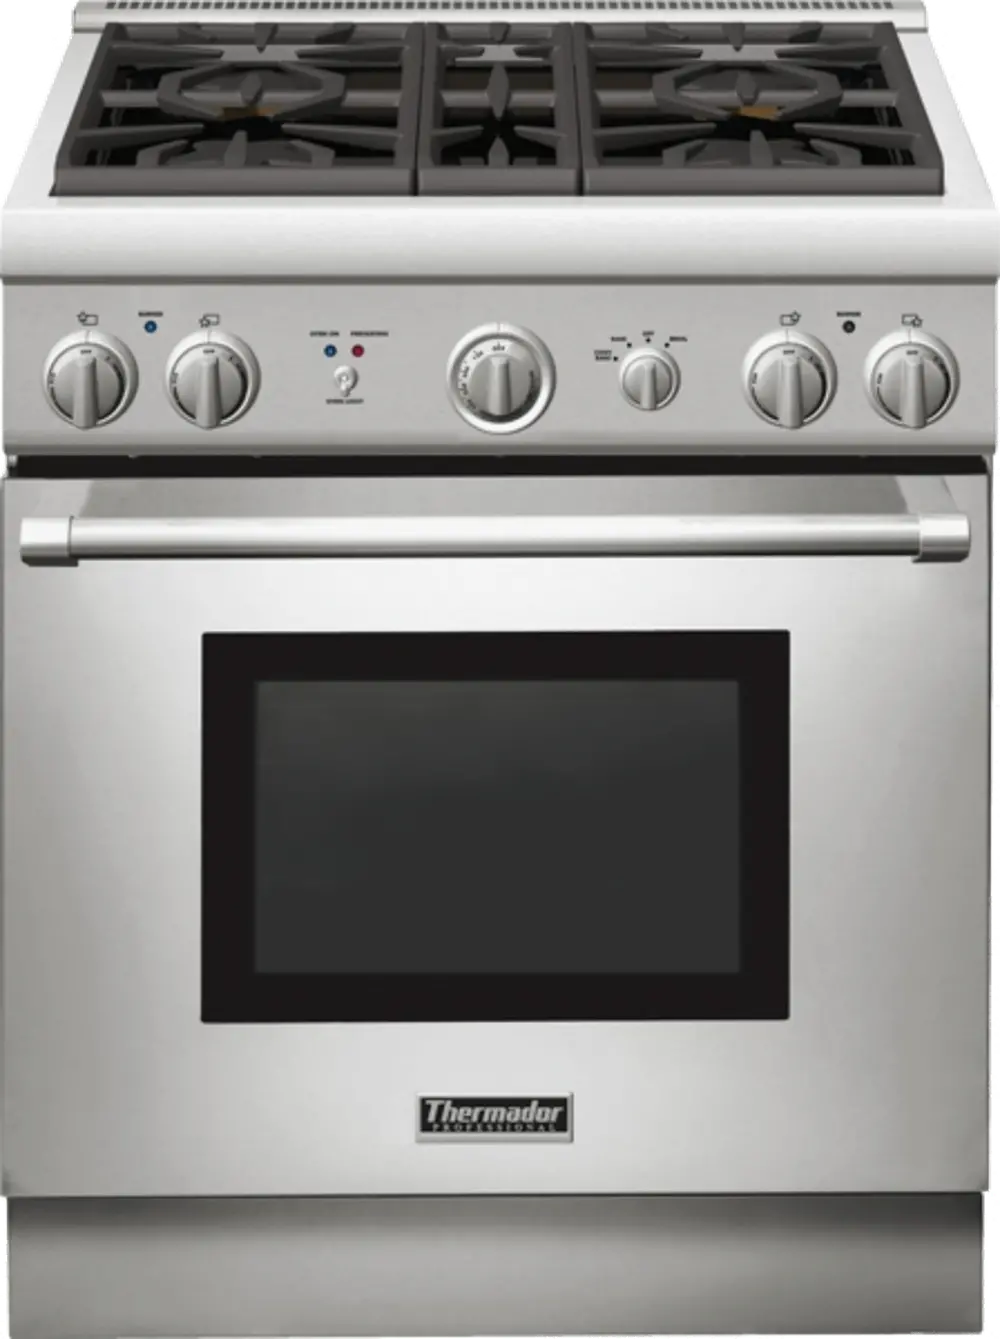 PRG304GH Thermador 30 Inch Gas Range - Stainless Steel-1